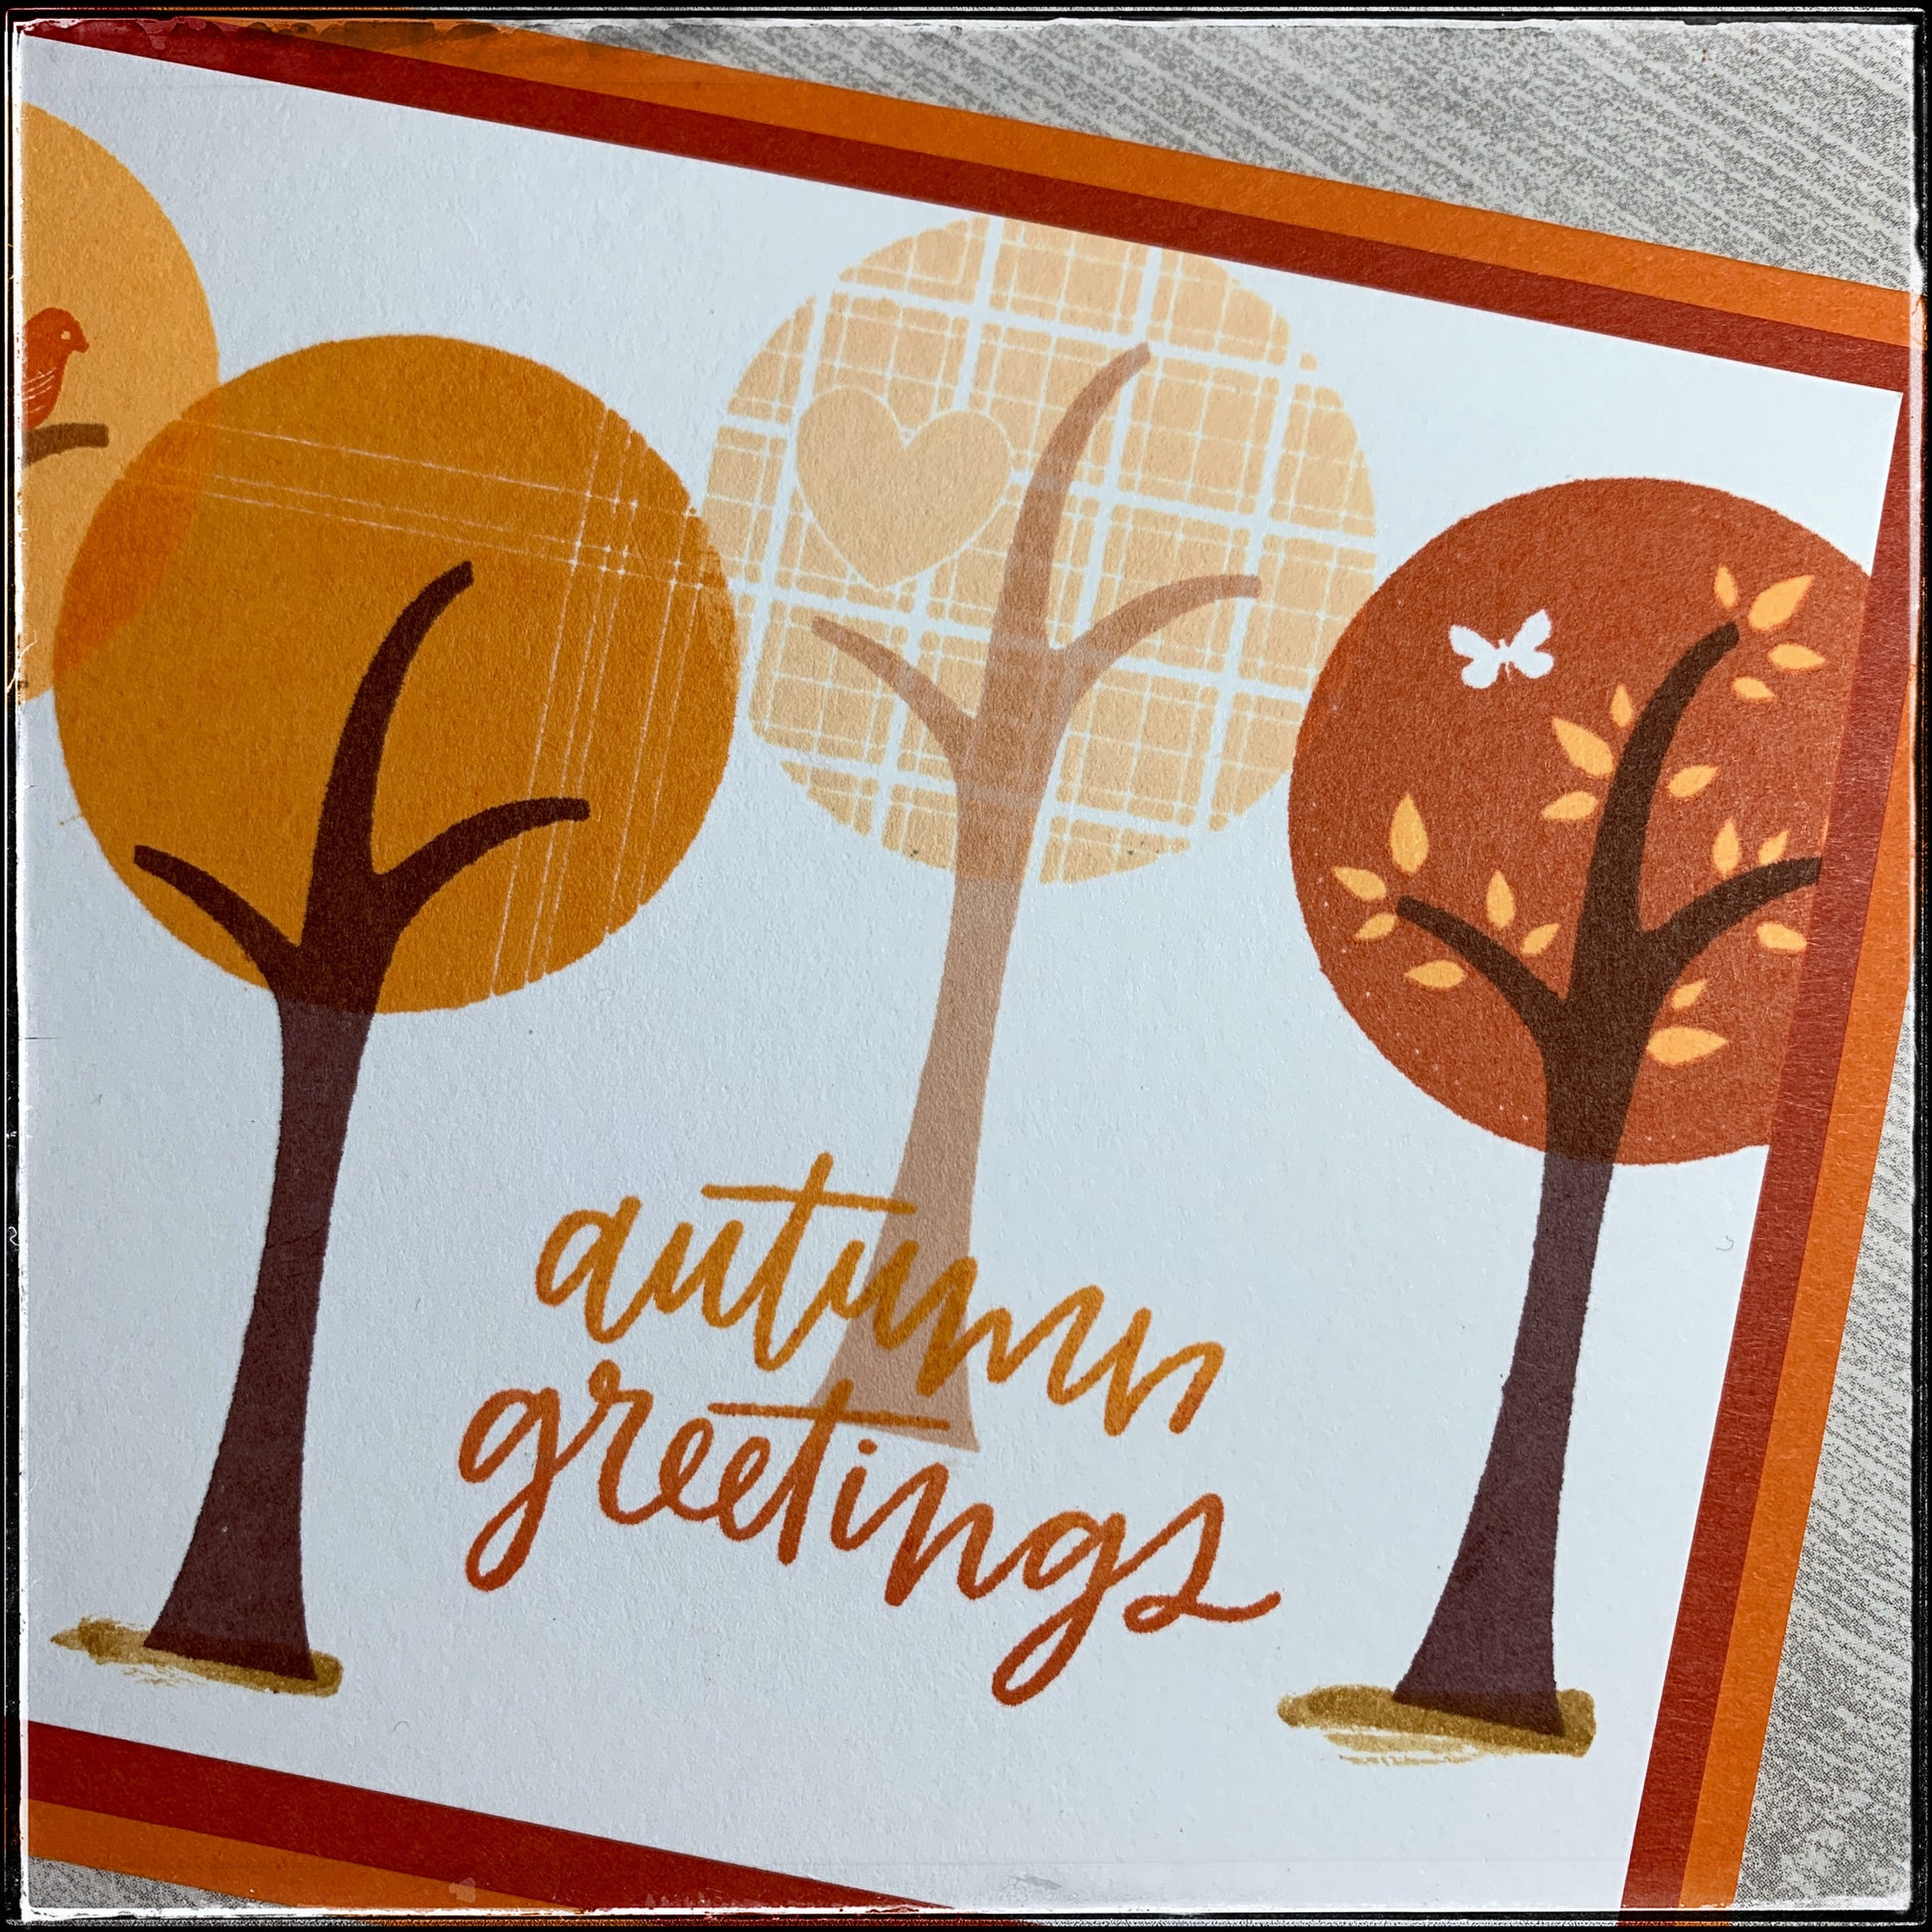 An up close detailed view of several of the stamped trees and the details on the tree tops. Thin striped lines are crisp and clear in a medium shade of orange. The lightest colored tree top is a beautiful plaid pattern with an inlaid heart design. The third tree top shown is the darkest color orange and features some lighter orange colored leaves. The sentiment "autumn greetings" overlaps the trunk of the middle tree in two shades of orange ink which are blended in an ombre color scheme. 